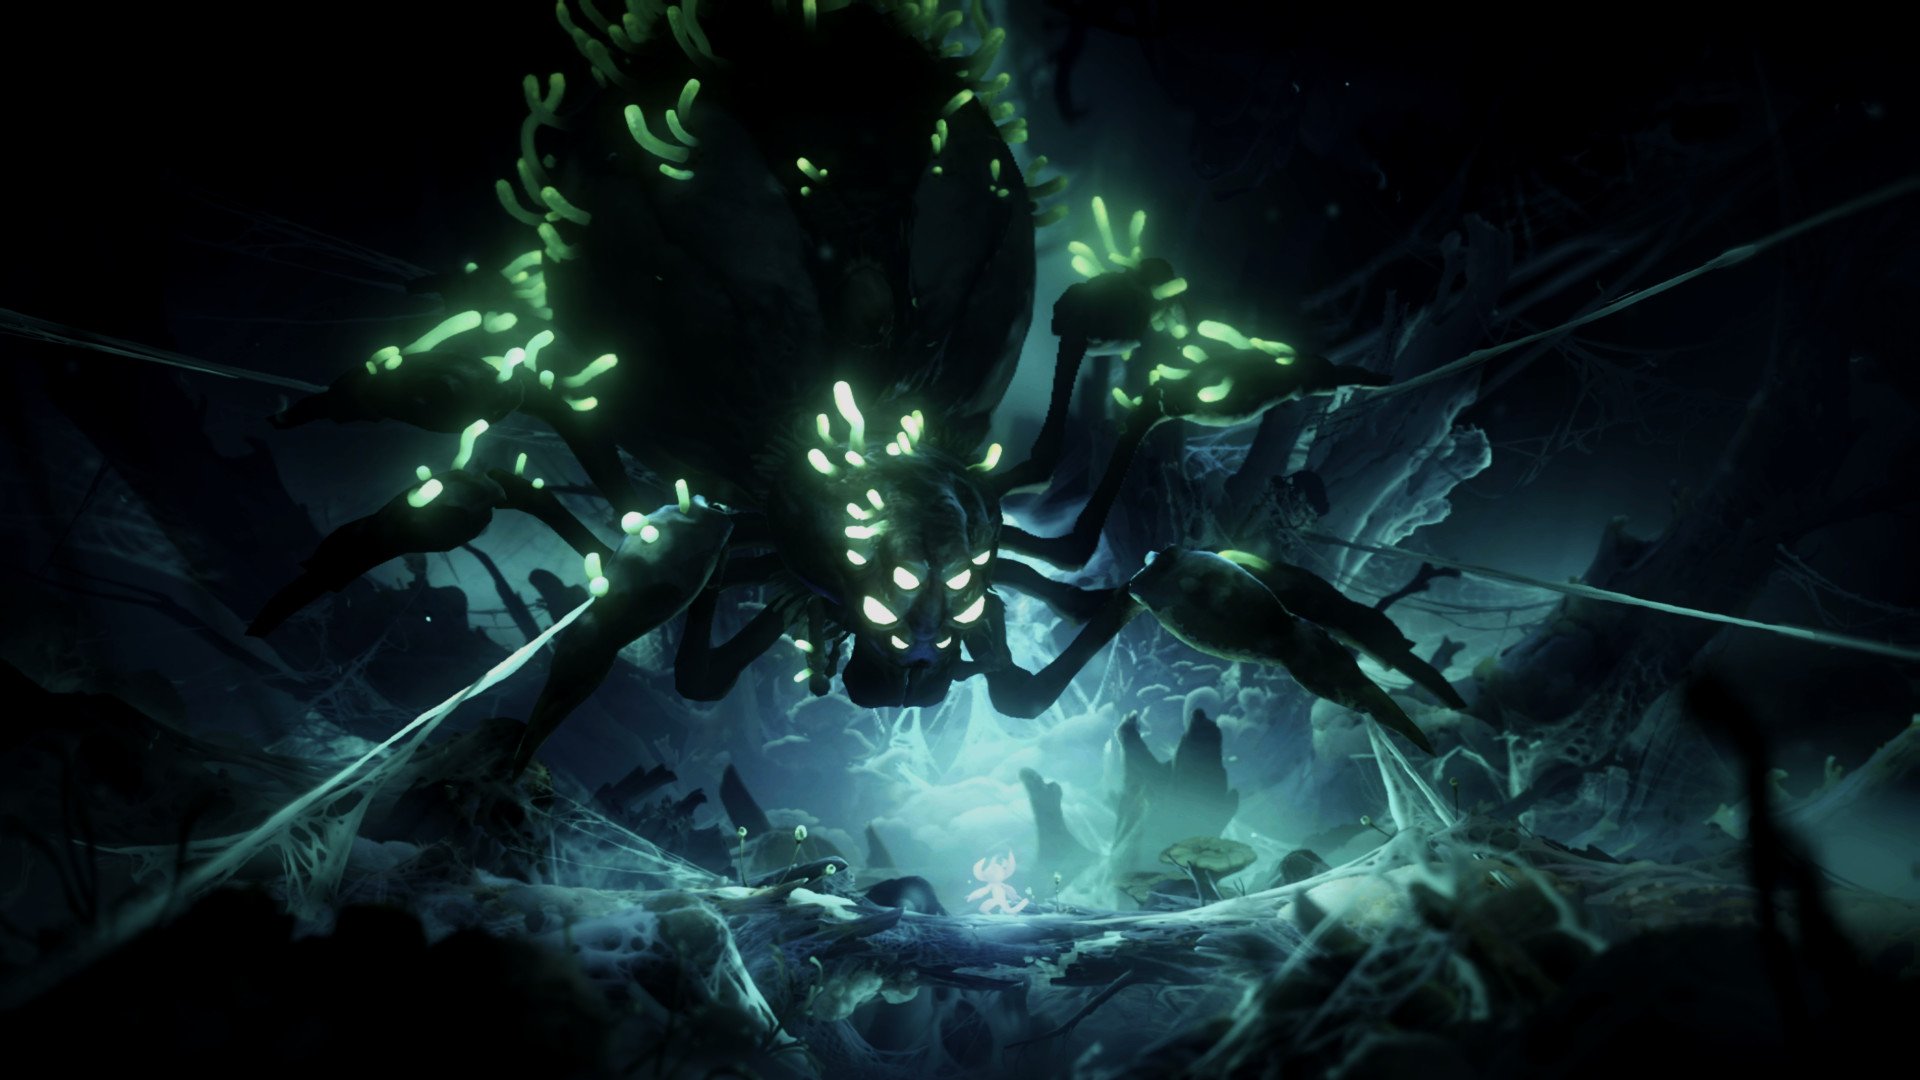 ori-and-the-will-of-the-wisps-review-pics_3.jpg